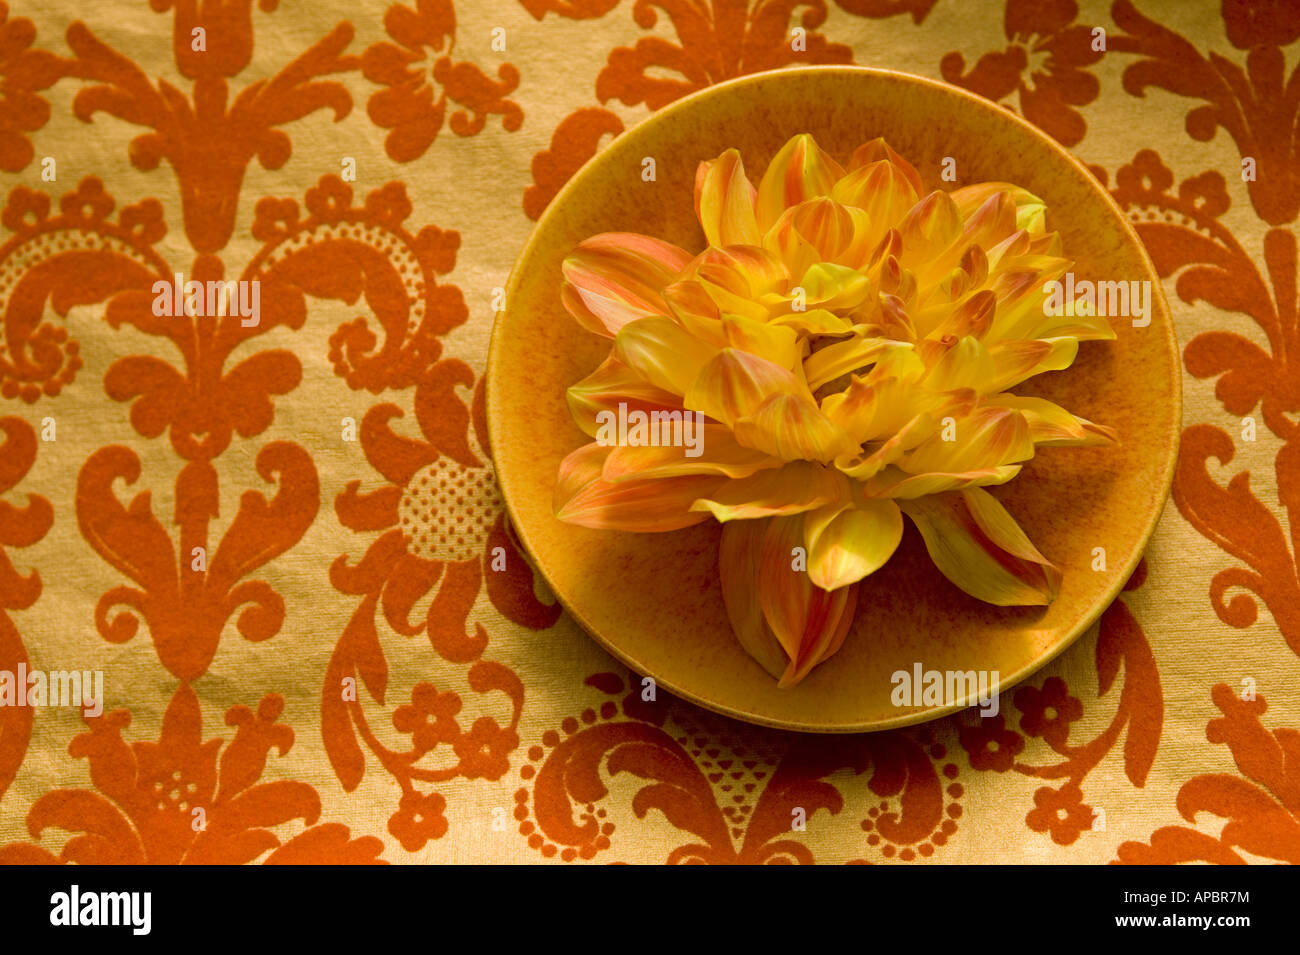 yellow dahlia flower on round plate still life orange circle simple petals delicate floral groovy wallpaper ornate warm Stock Photo